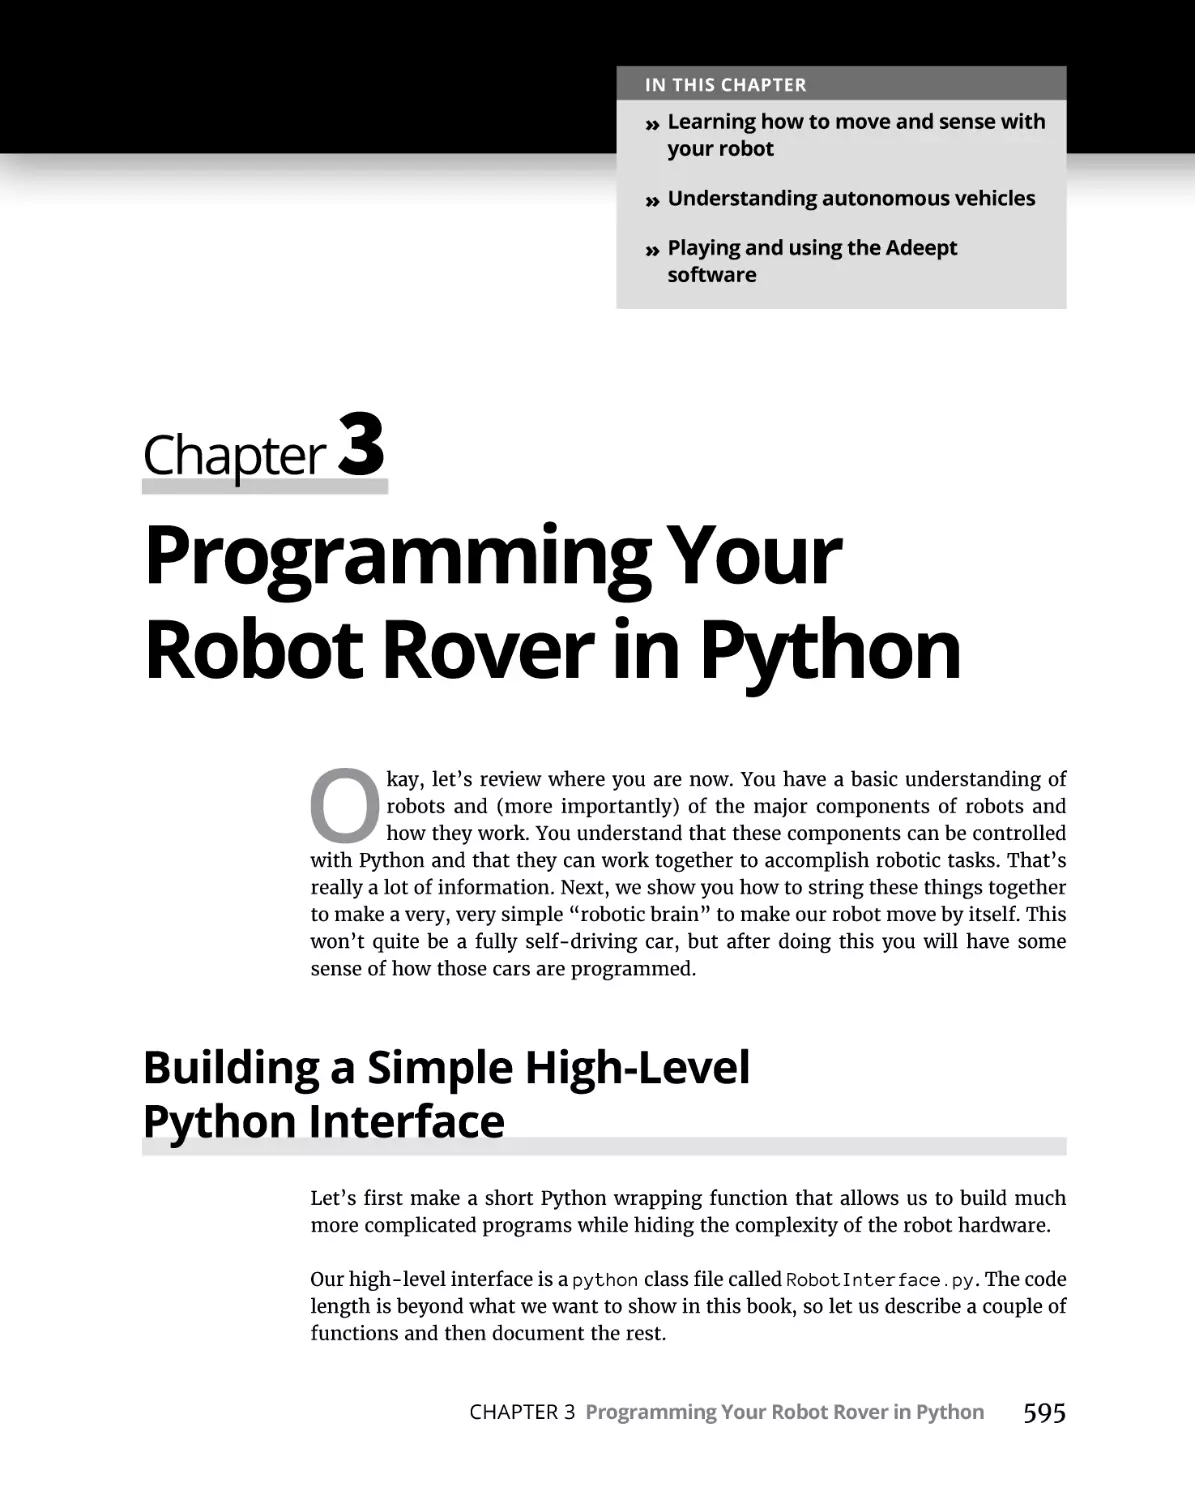 Chapter 3 Programming Your Robot Rover in Python
Building a Simple High-Level Python Interface